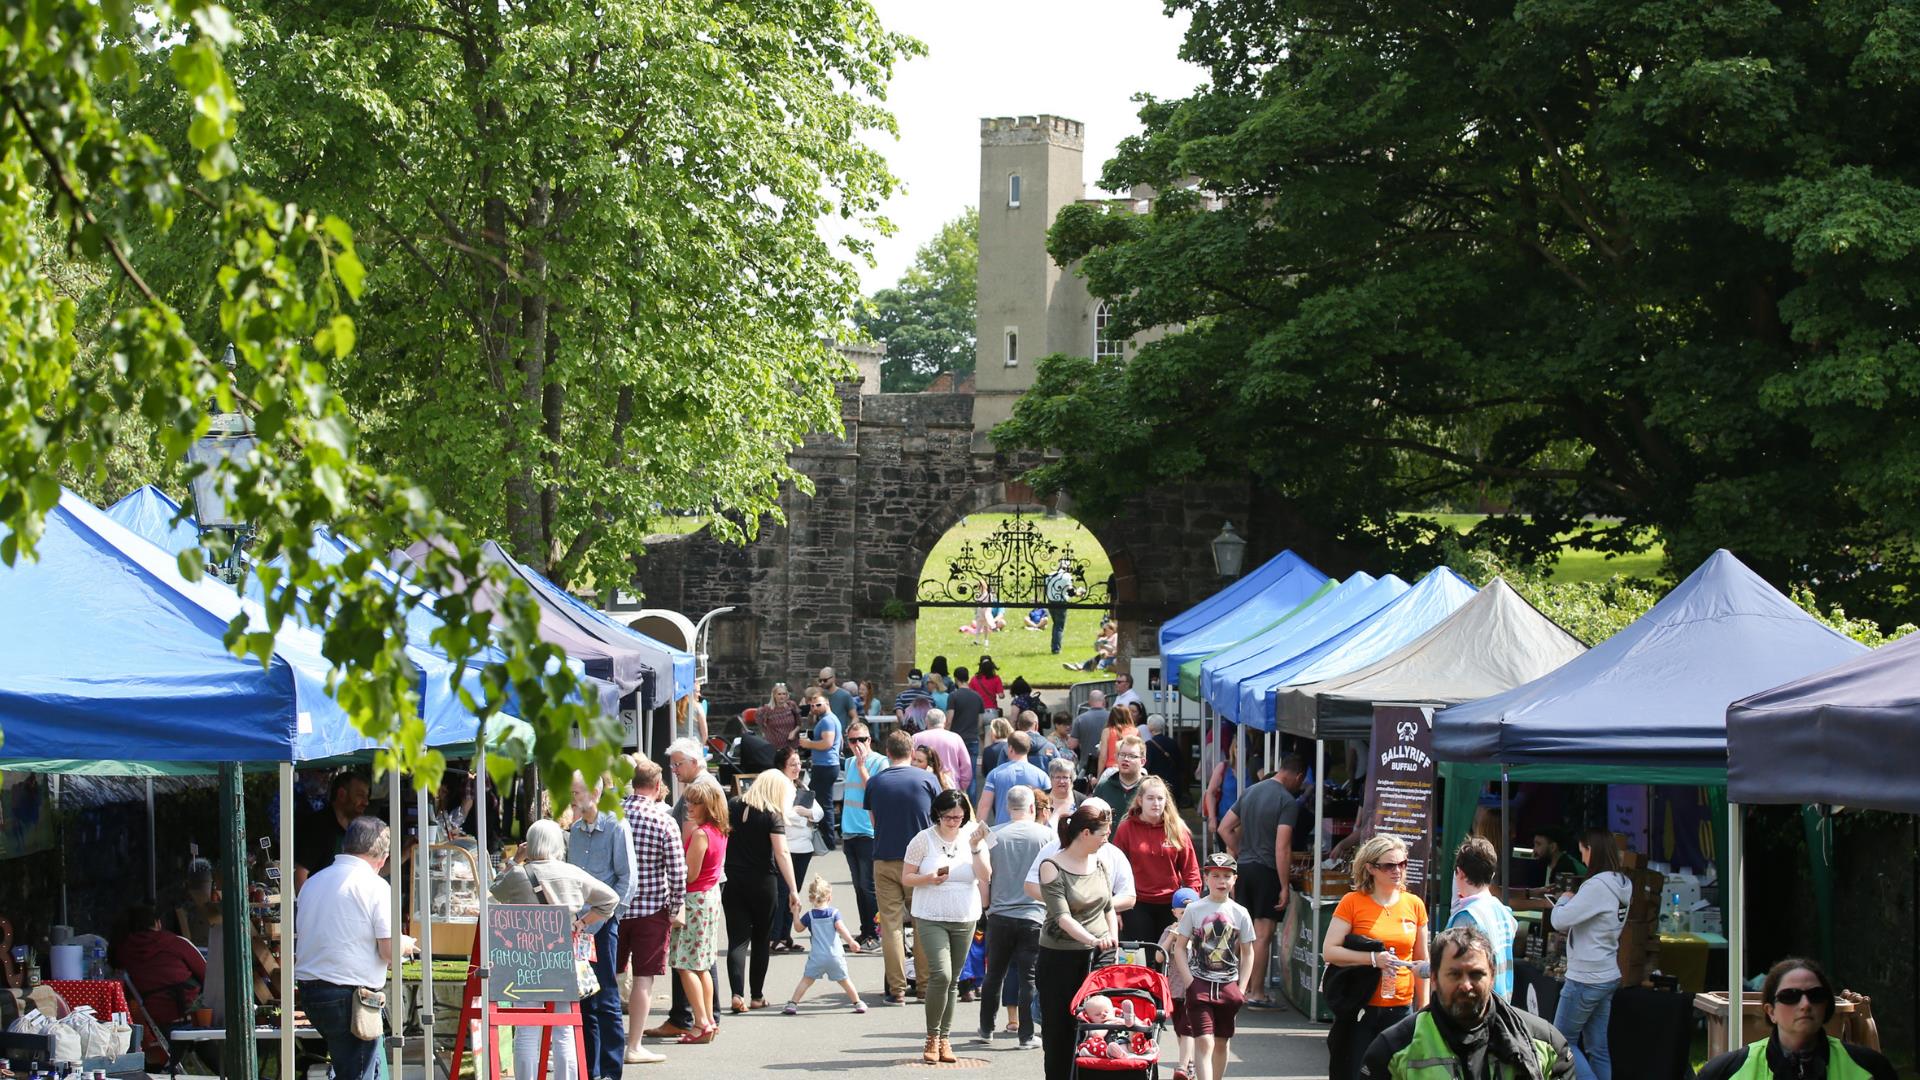 Image is of The Dark Walk with lots of stalls and people at the Farmers Market in Royal Hillsborough